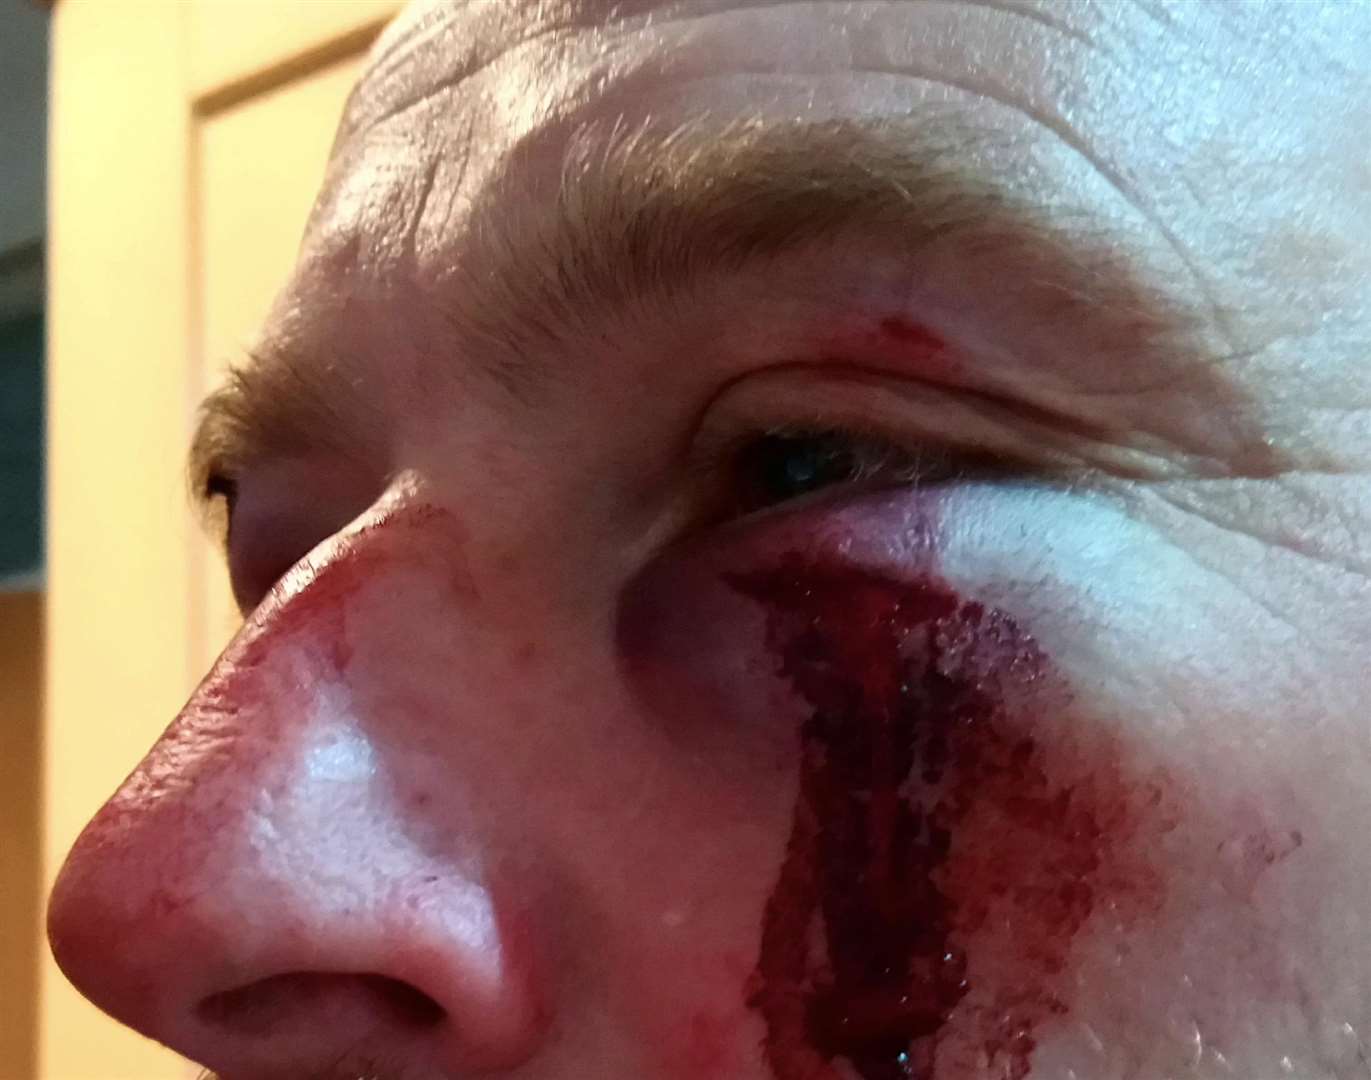 A saboteur sustained injuries that the group claims were caused by hunt supporters.